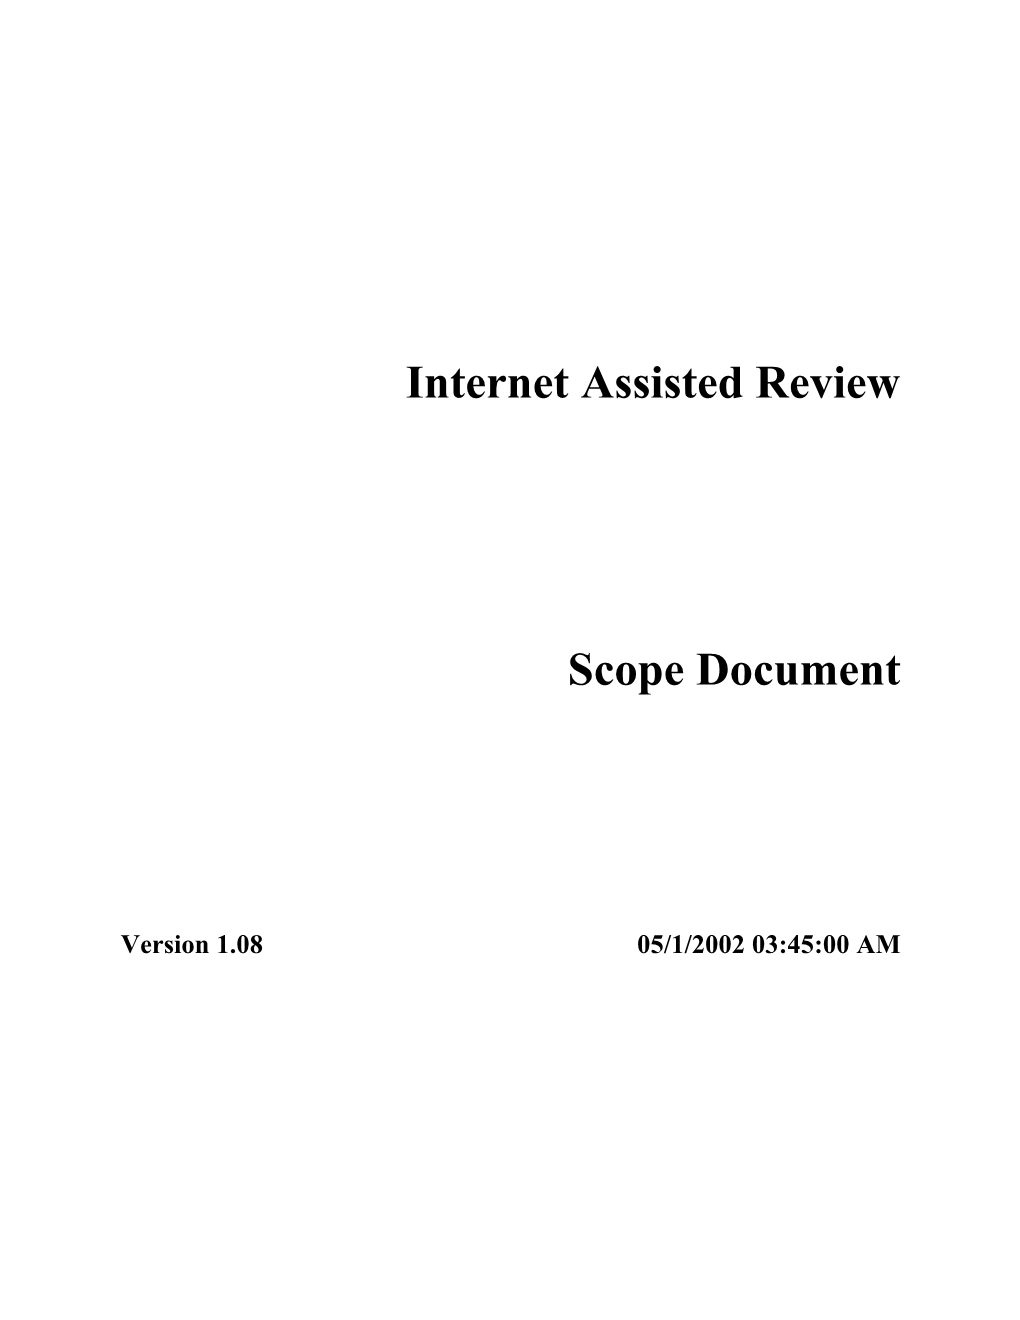 Internet Assisted Review Scope Document